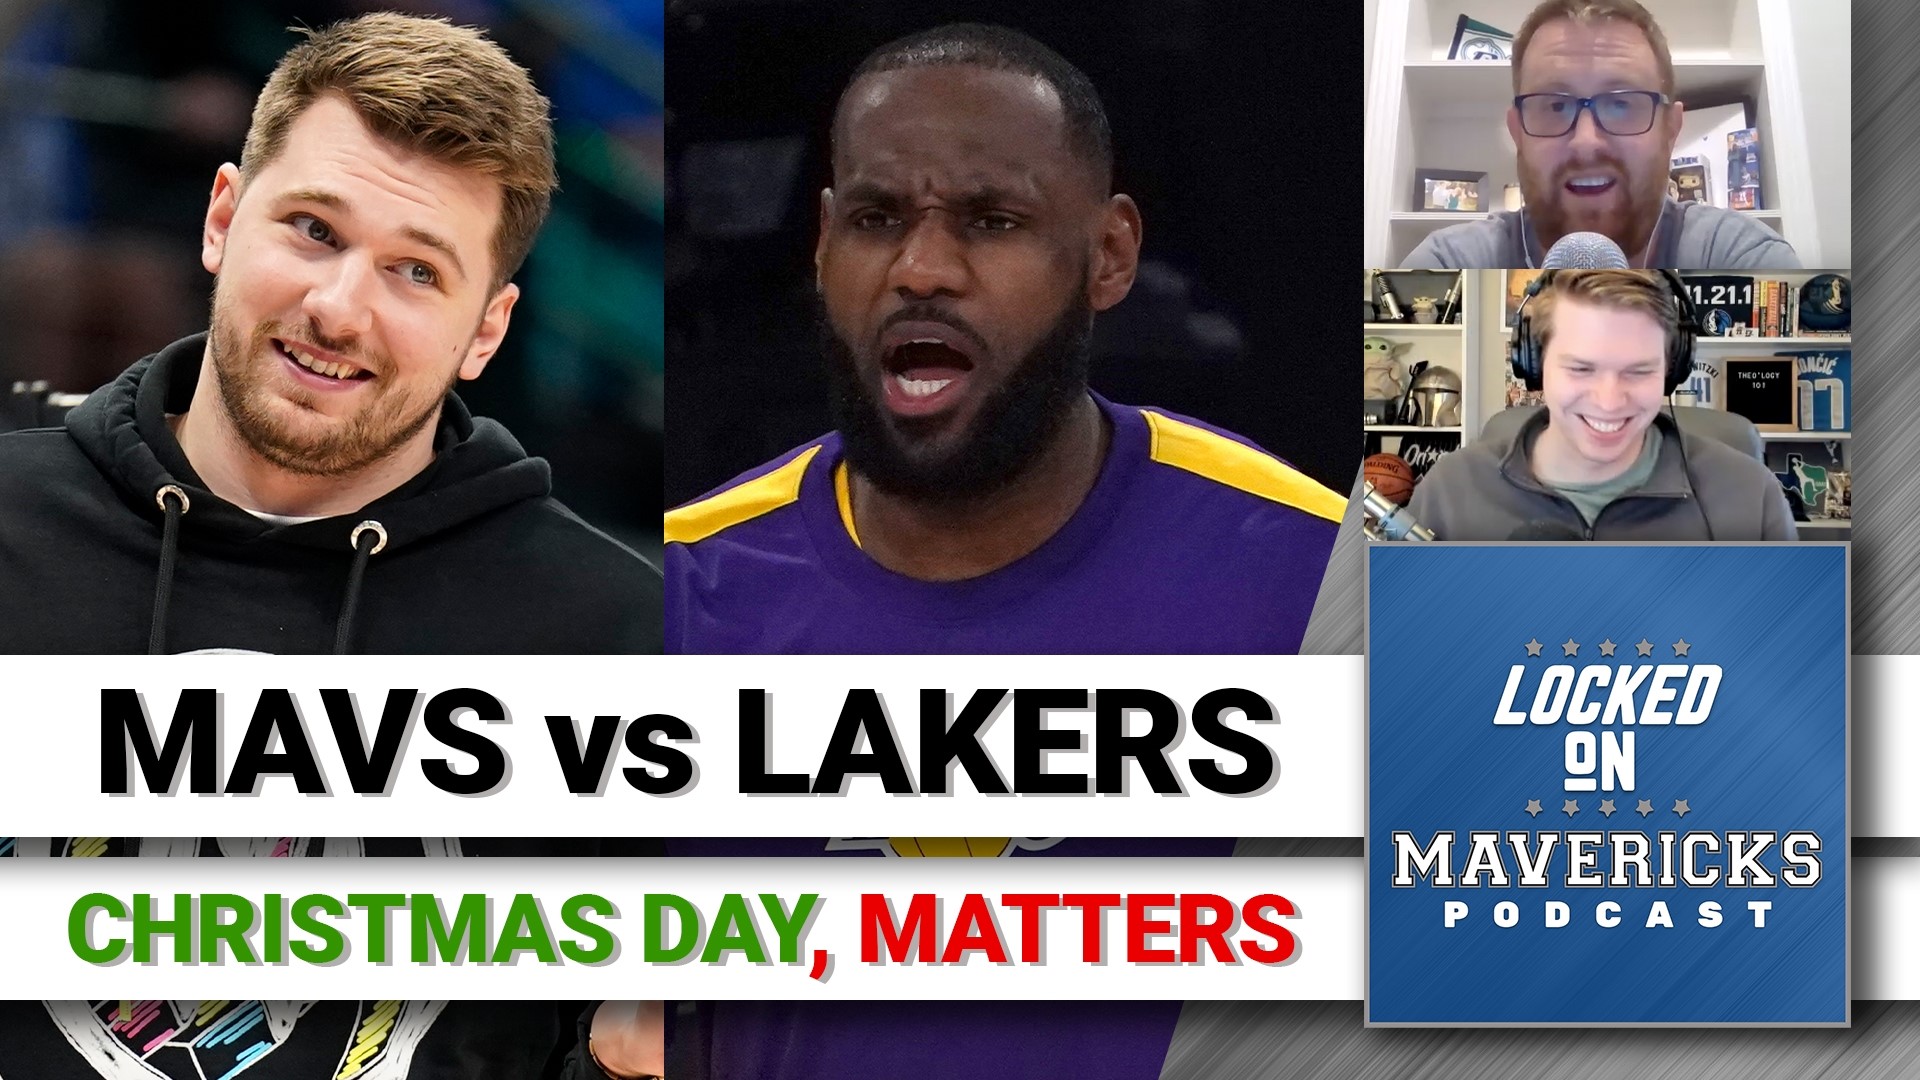 Nick Angstadt is joined by Kirk Henderson (Mavs Moneyball) to discuss the Mavs playing at home on Christmas Day against LeBron and the Lakers.